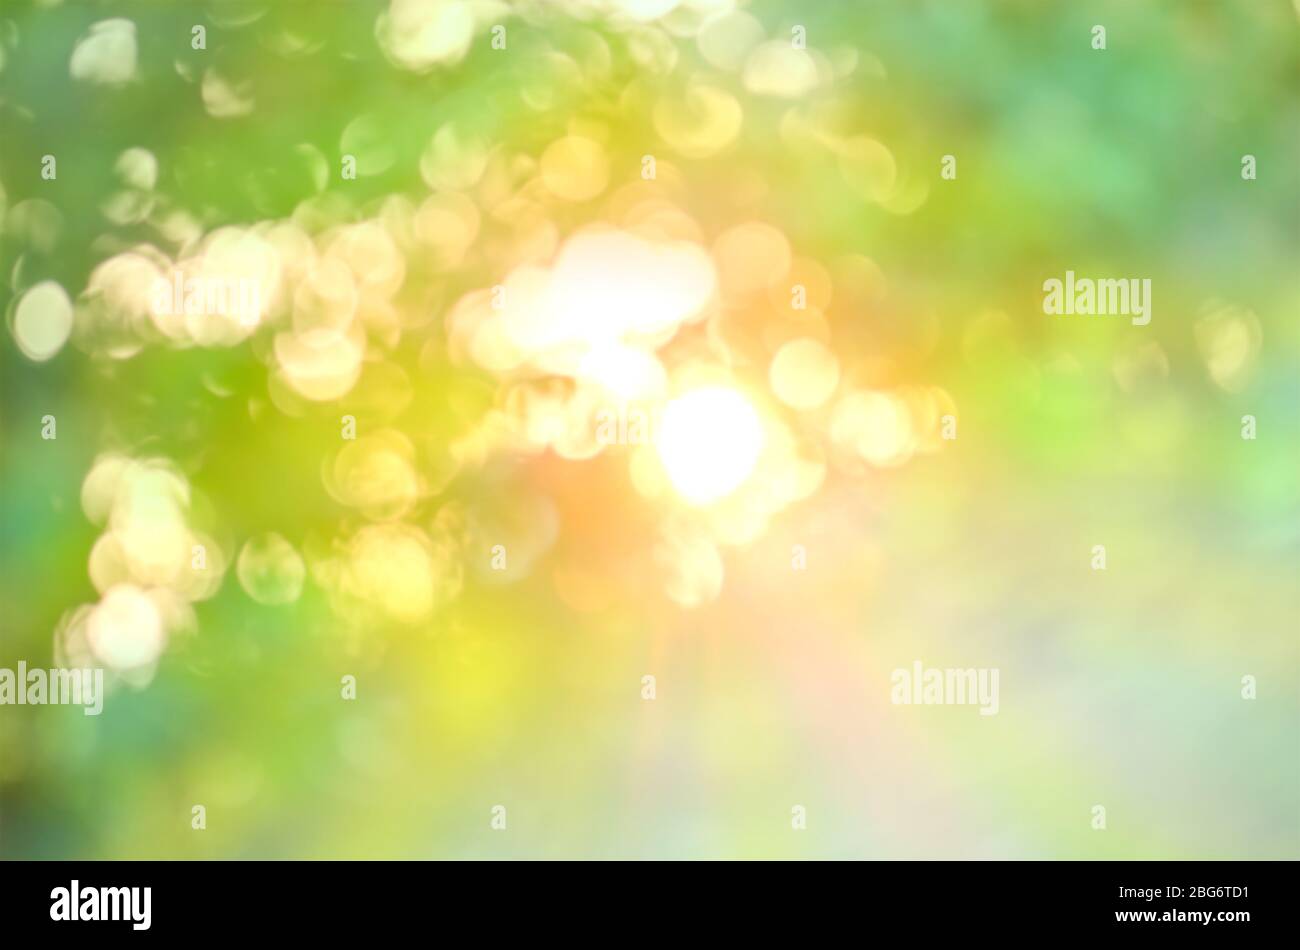 Green nature defocus abstract blur background. Natural blurred bokeh Stock  Photo - Alamy